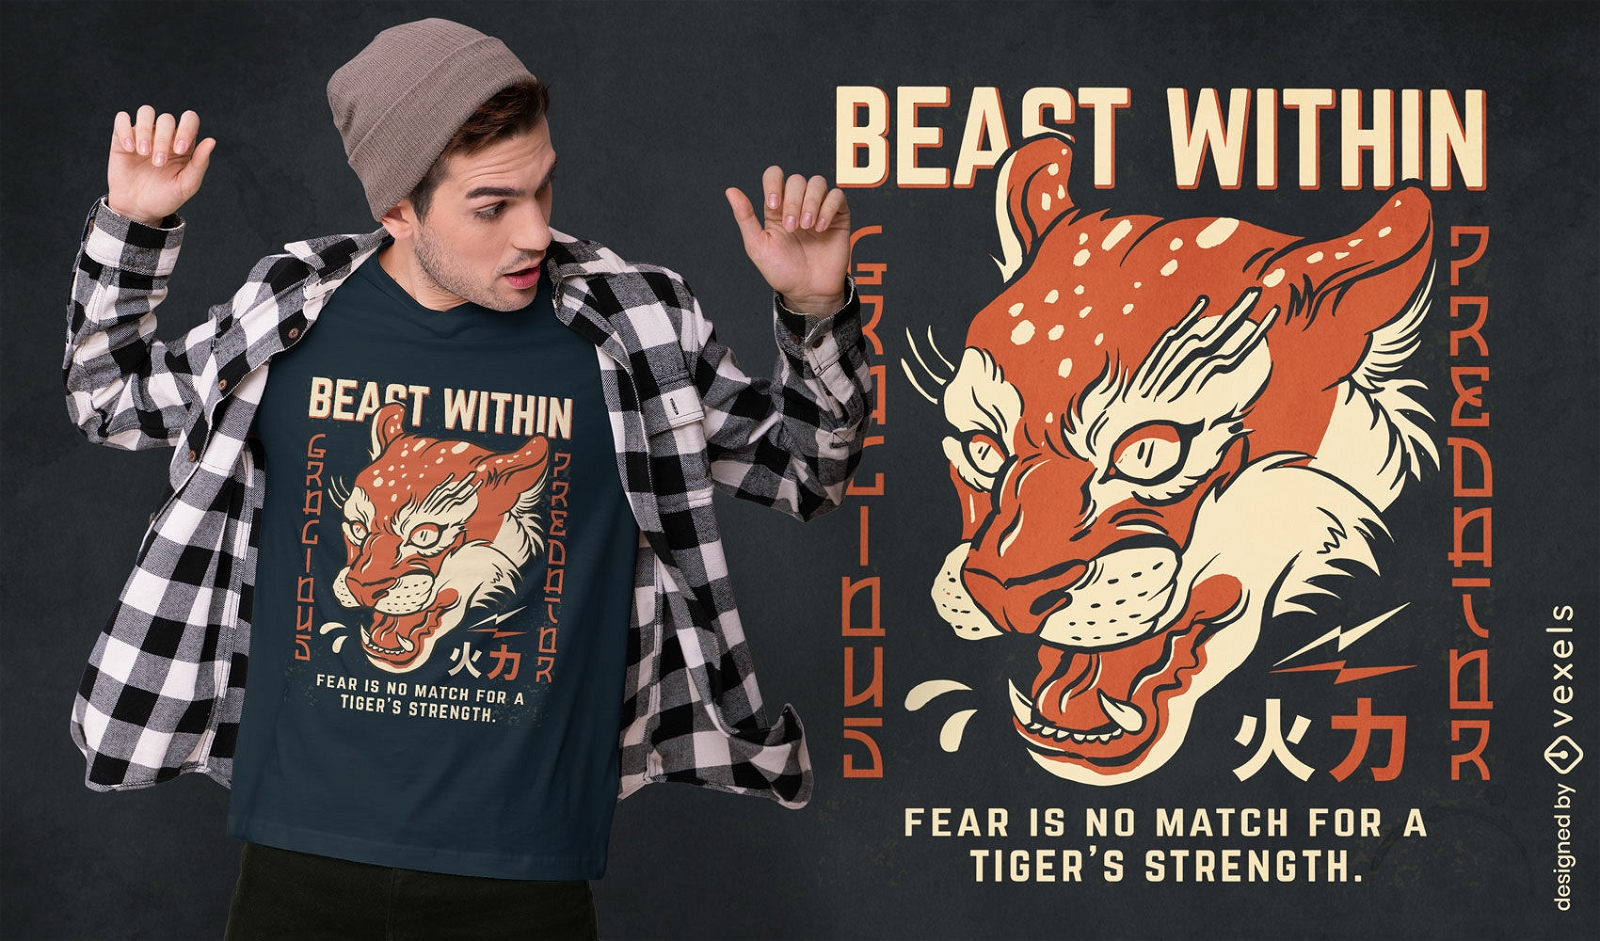 Tiger's strenght quote t-shirt design 